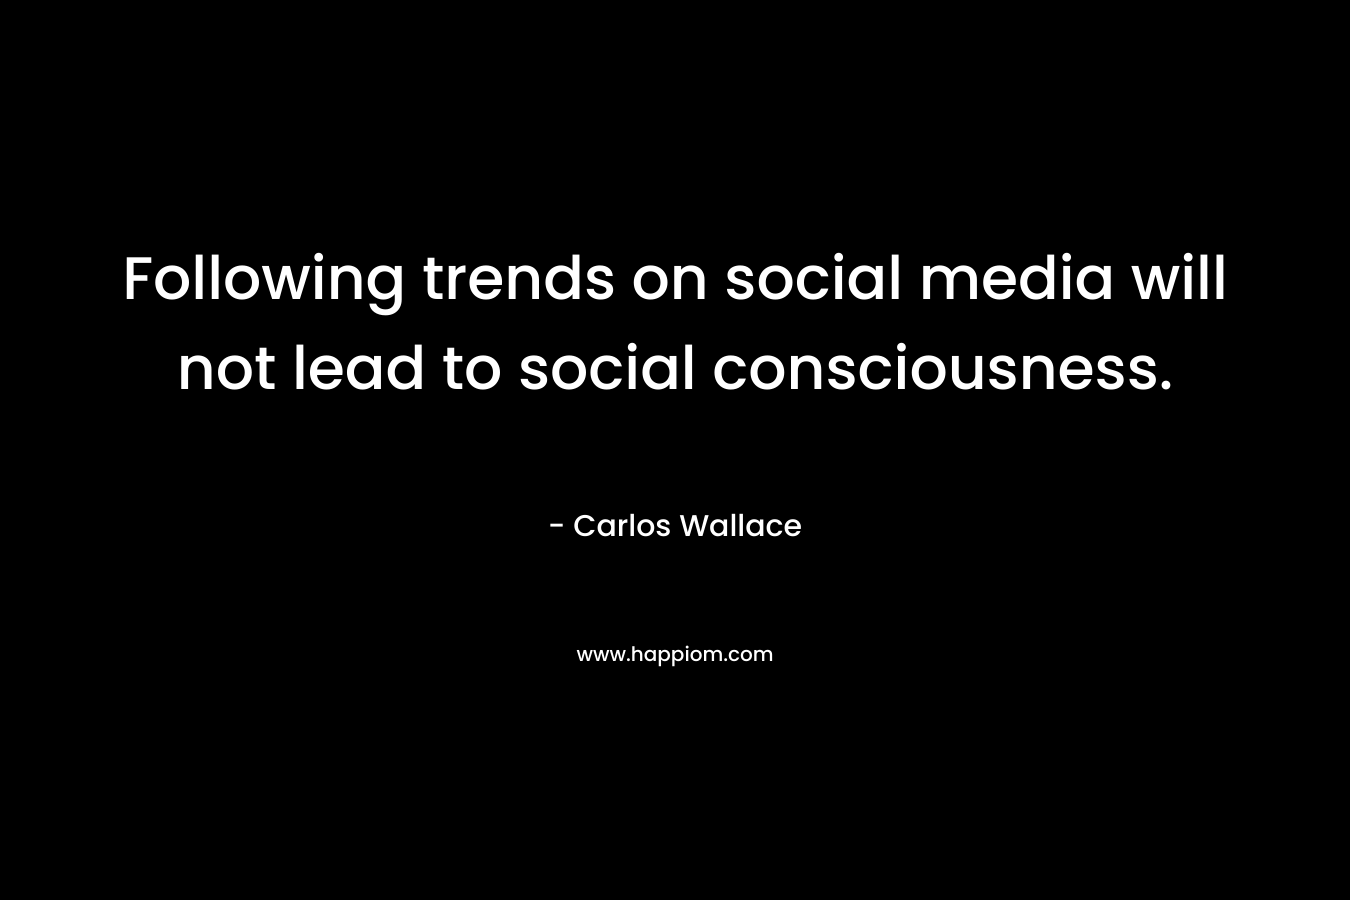 Following trends on social media will not lead to social consciousness.